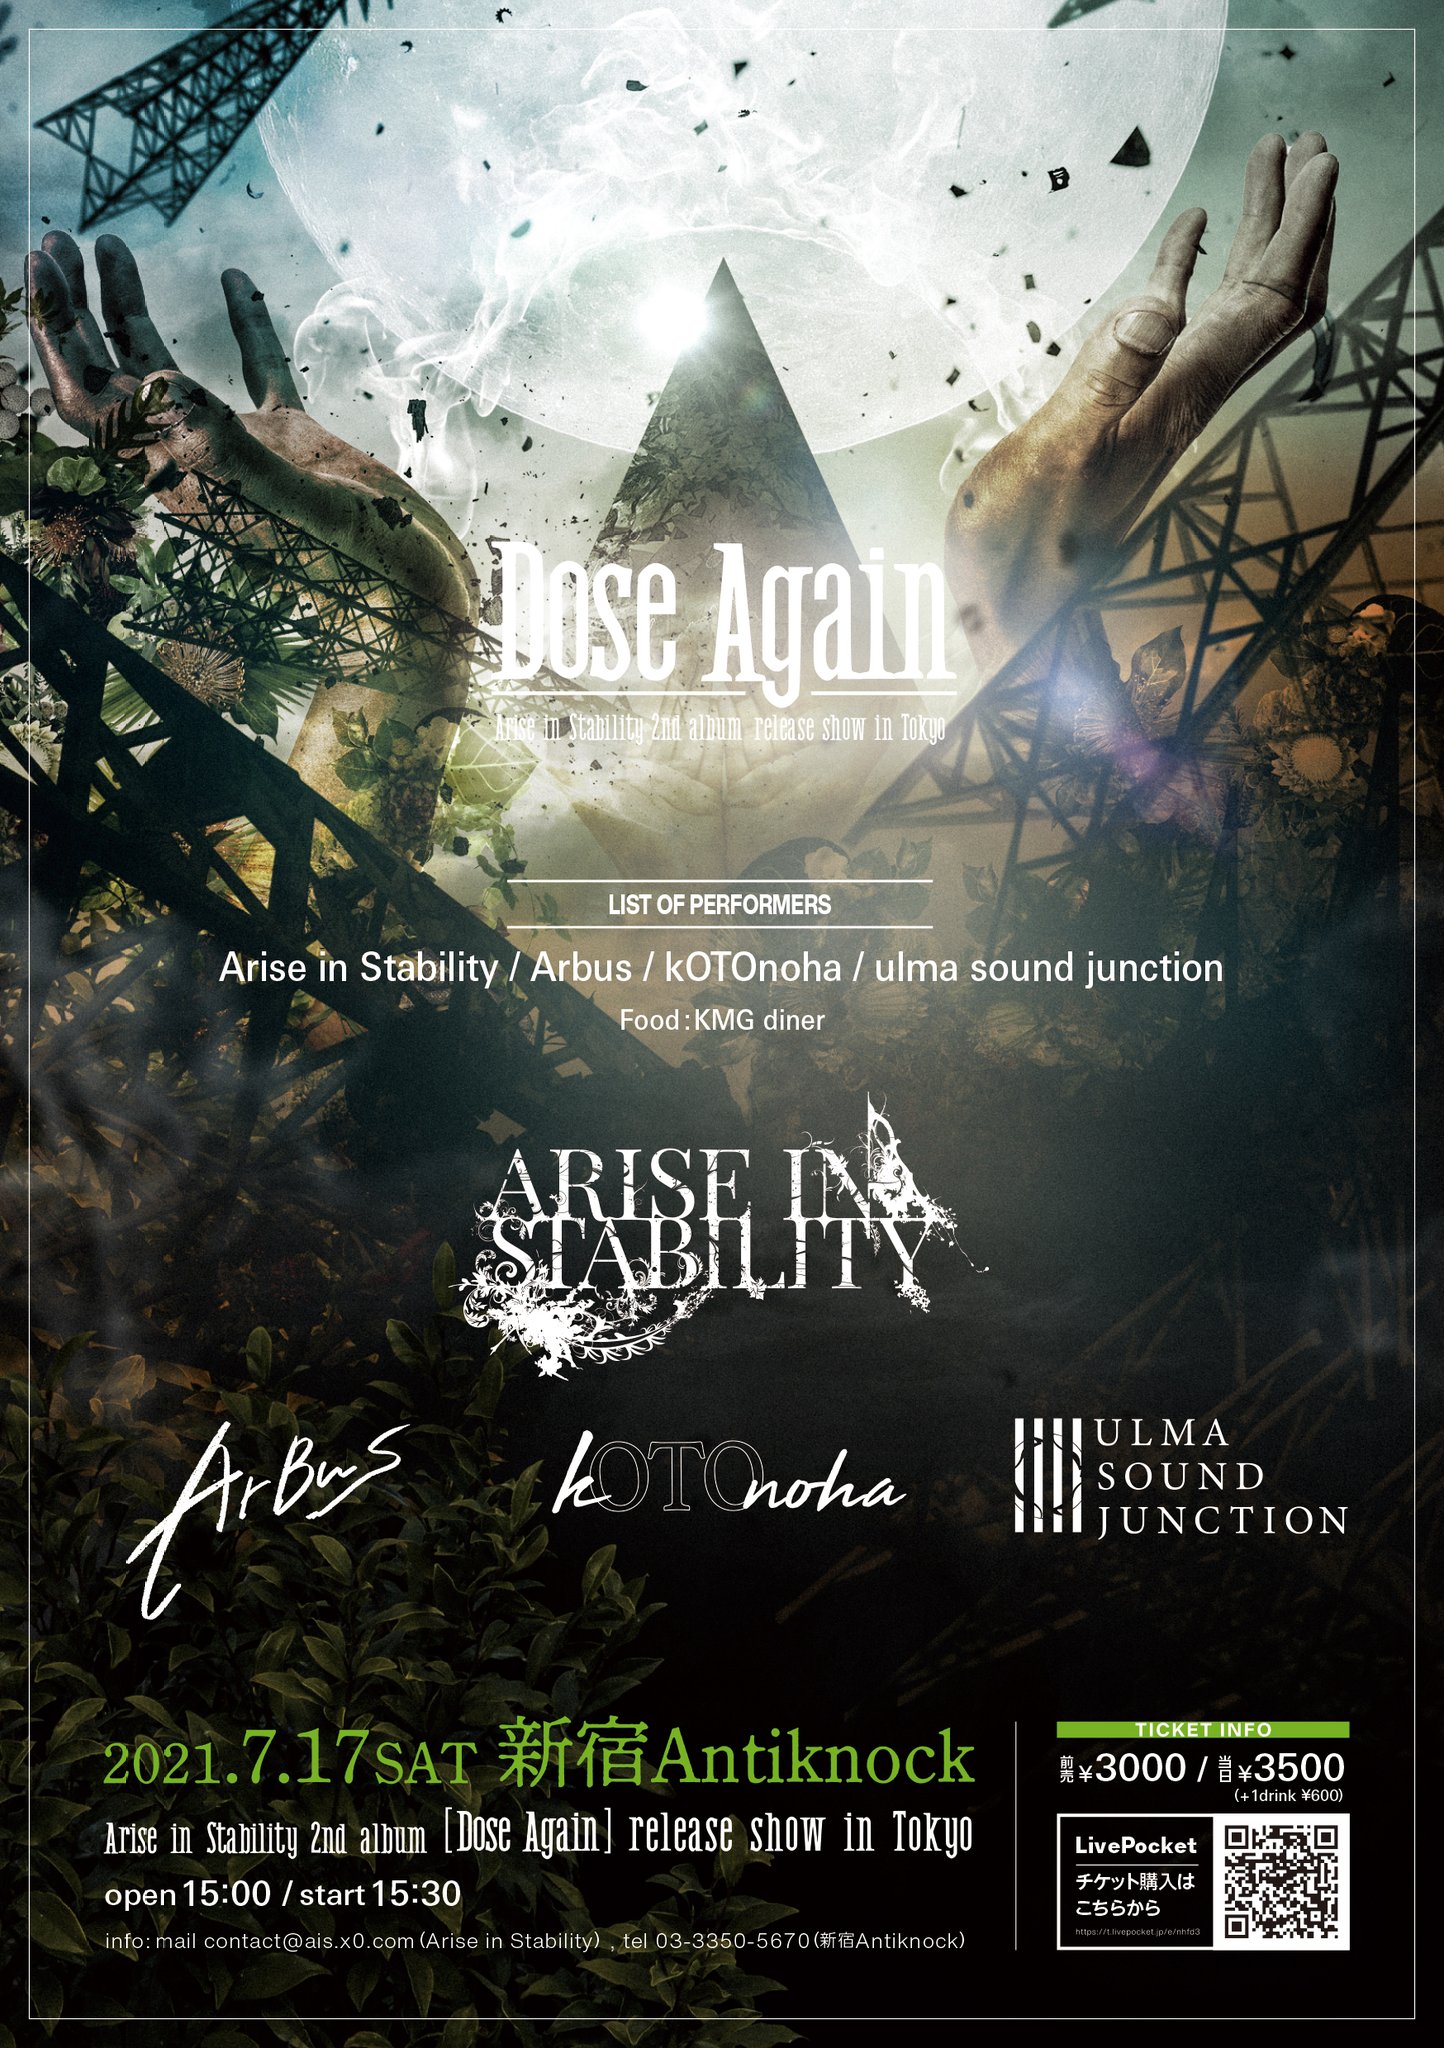 Arise in Stability 2nd album "Dose Again" release show in Tokyo